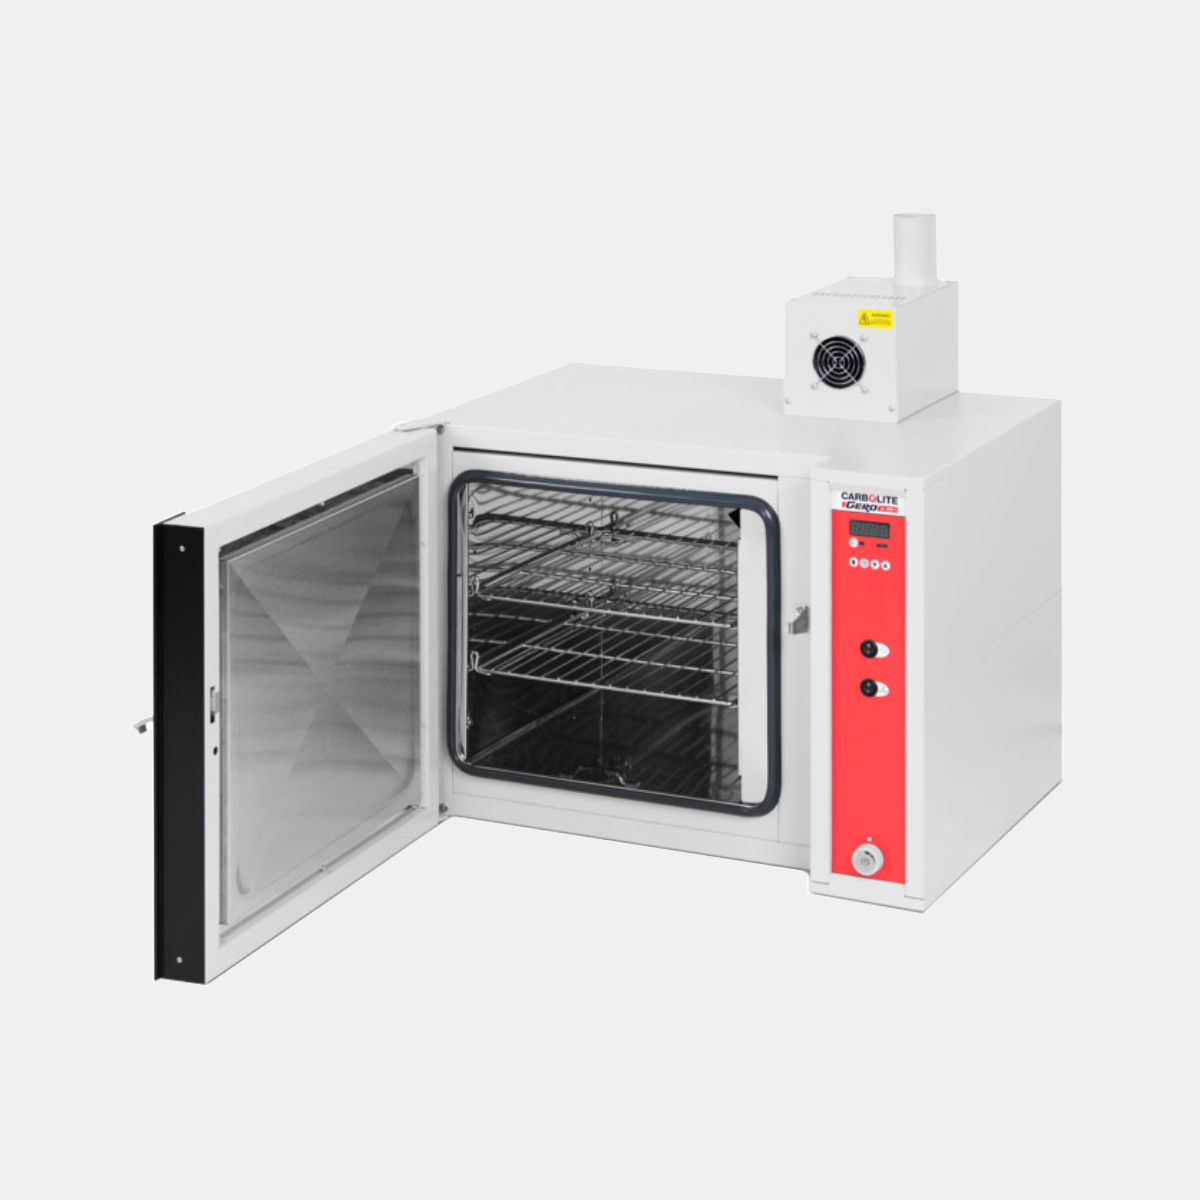 Solvent Drying Oven (up to 300ºC)